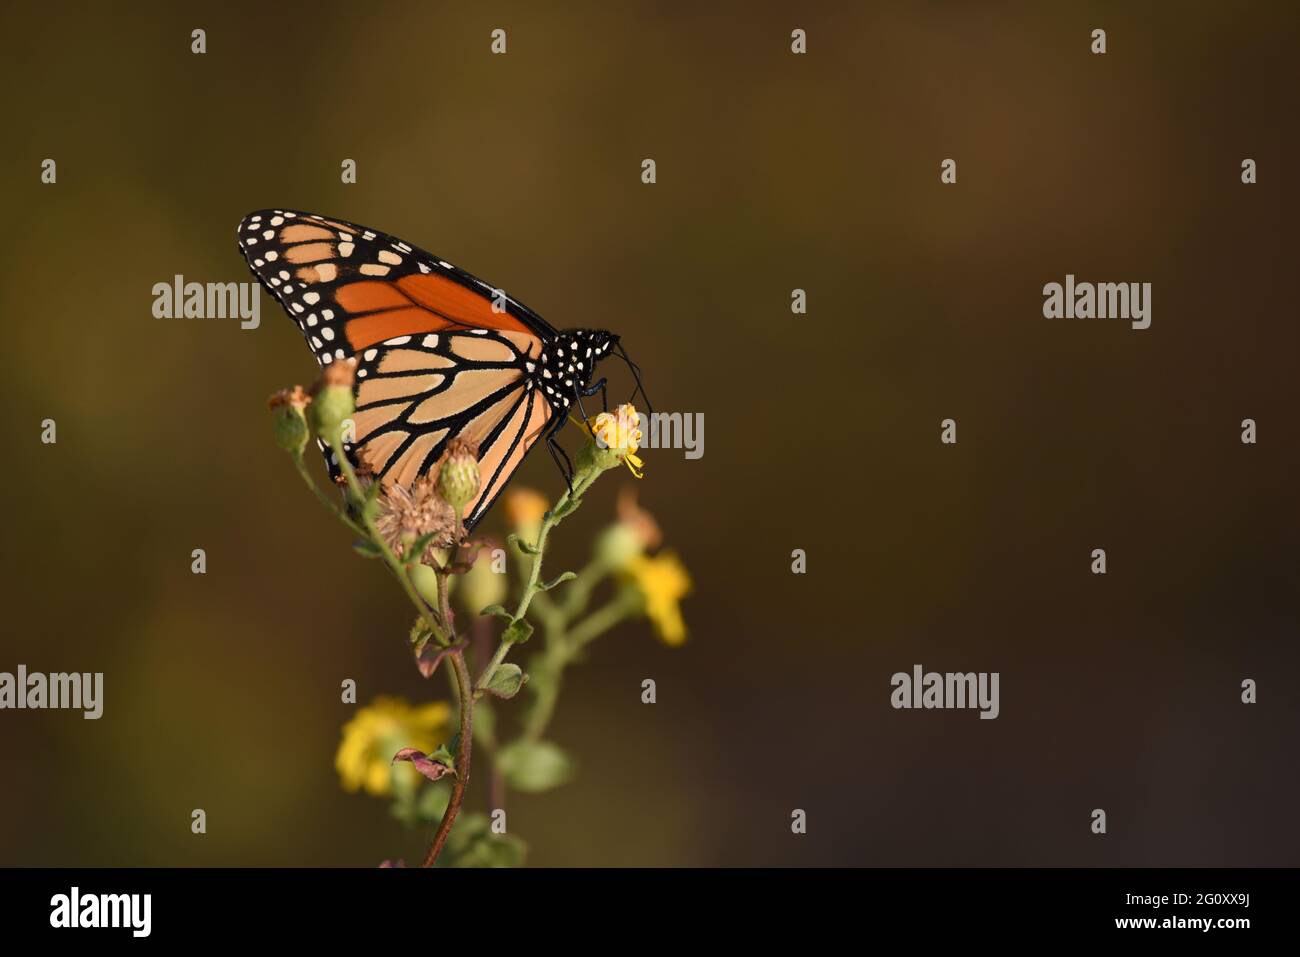 A monarch butterfly rests on a flower in an image featuring space for copy on the right. The image was taken in Daphne, AL, on Oct. 20, 2020. Stock Photo